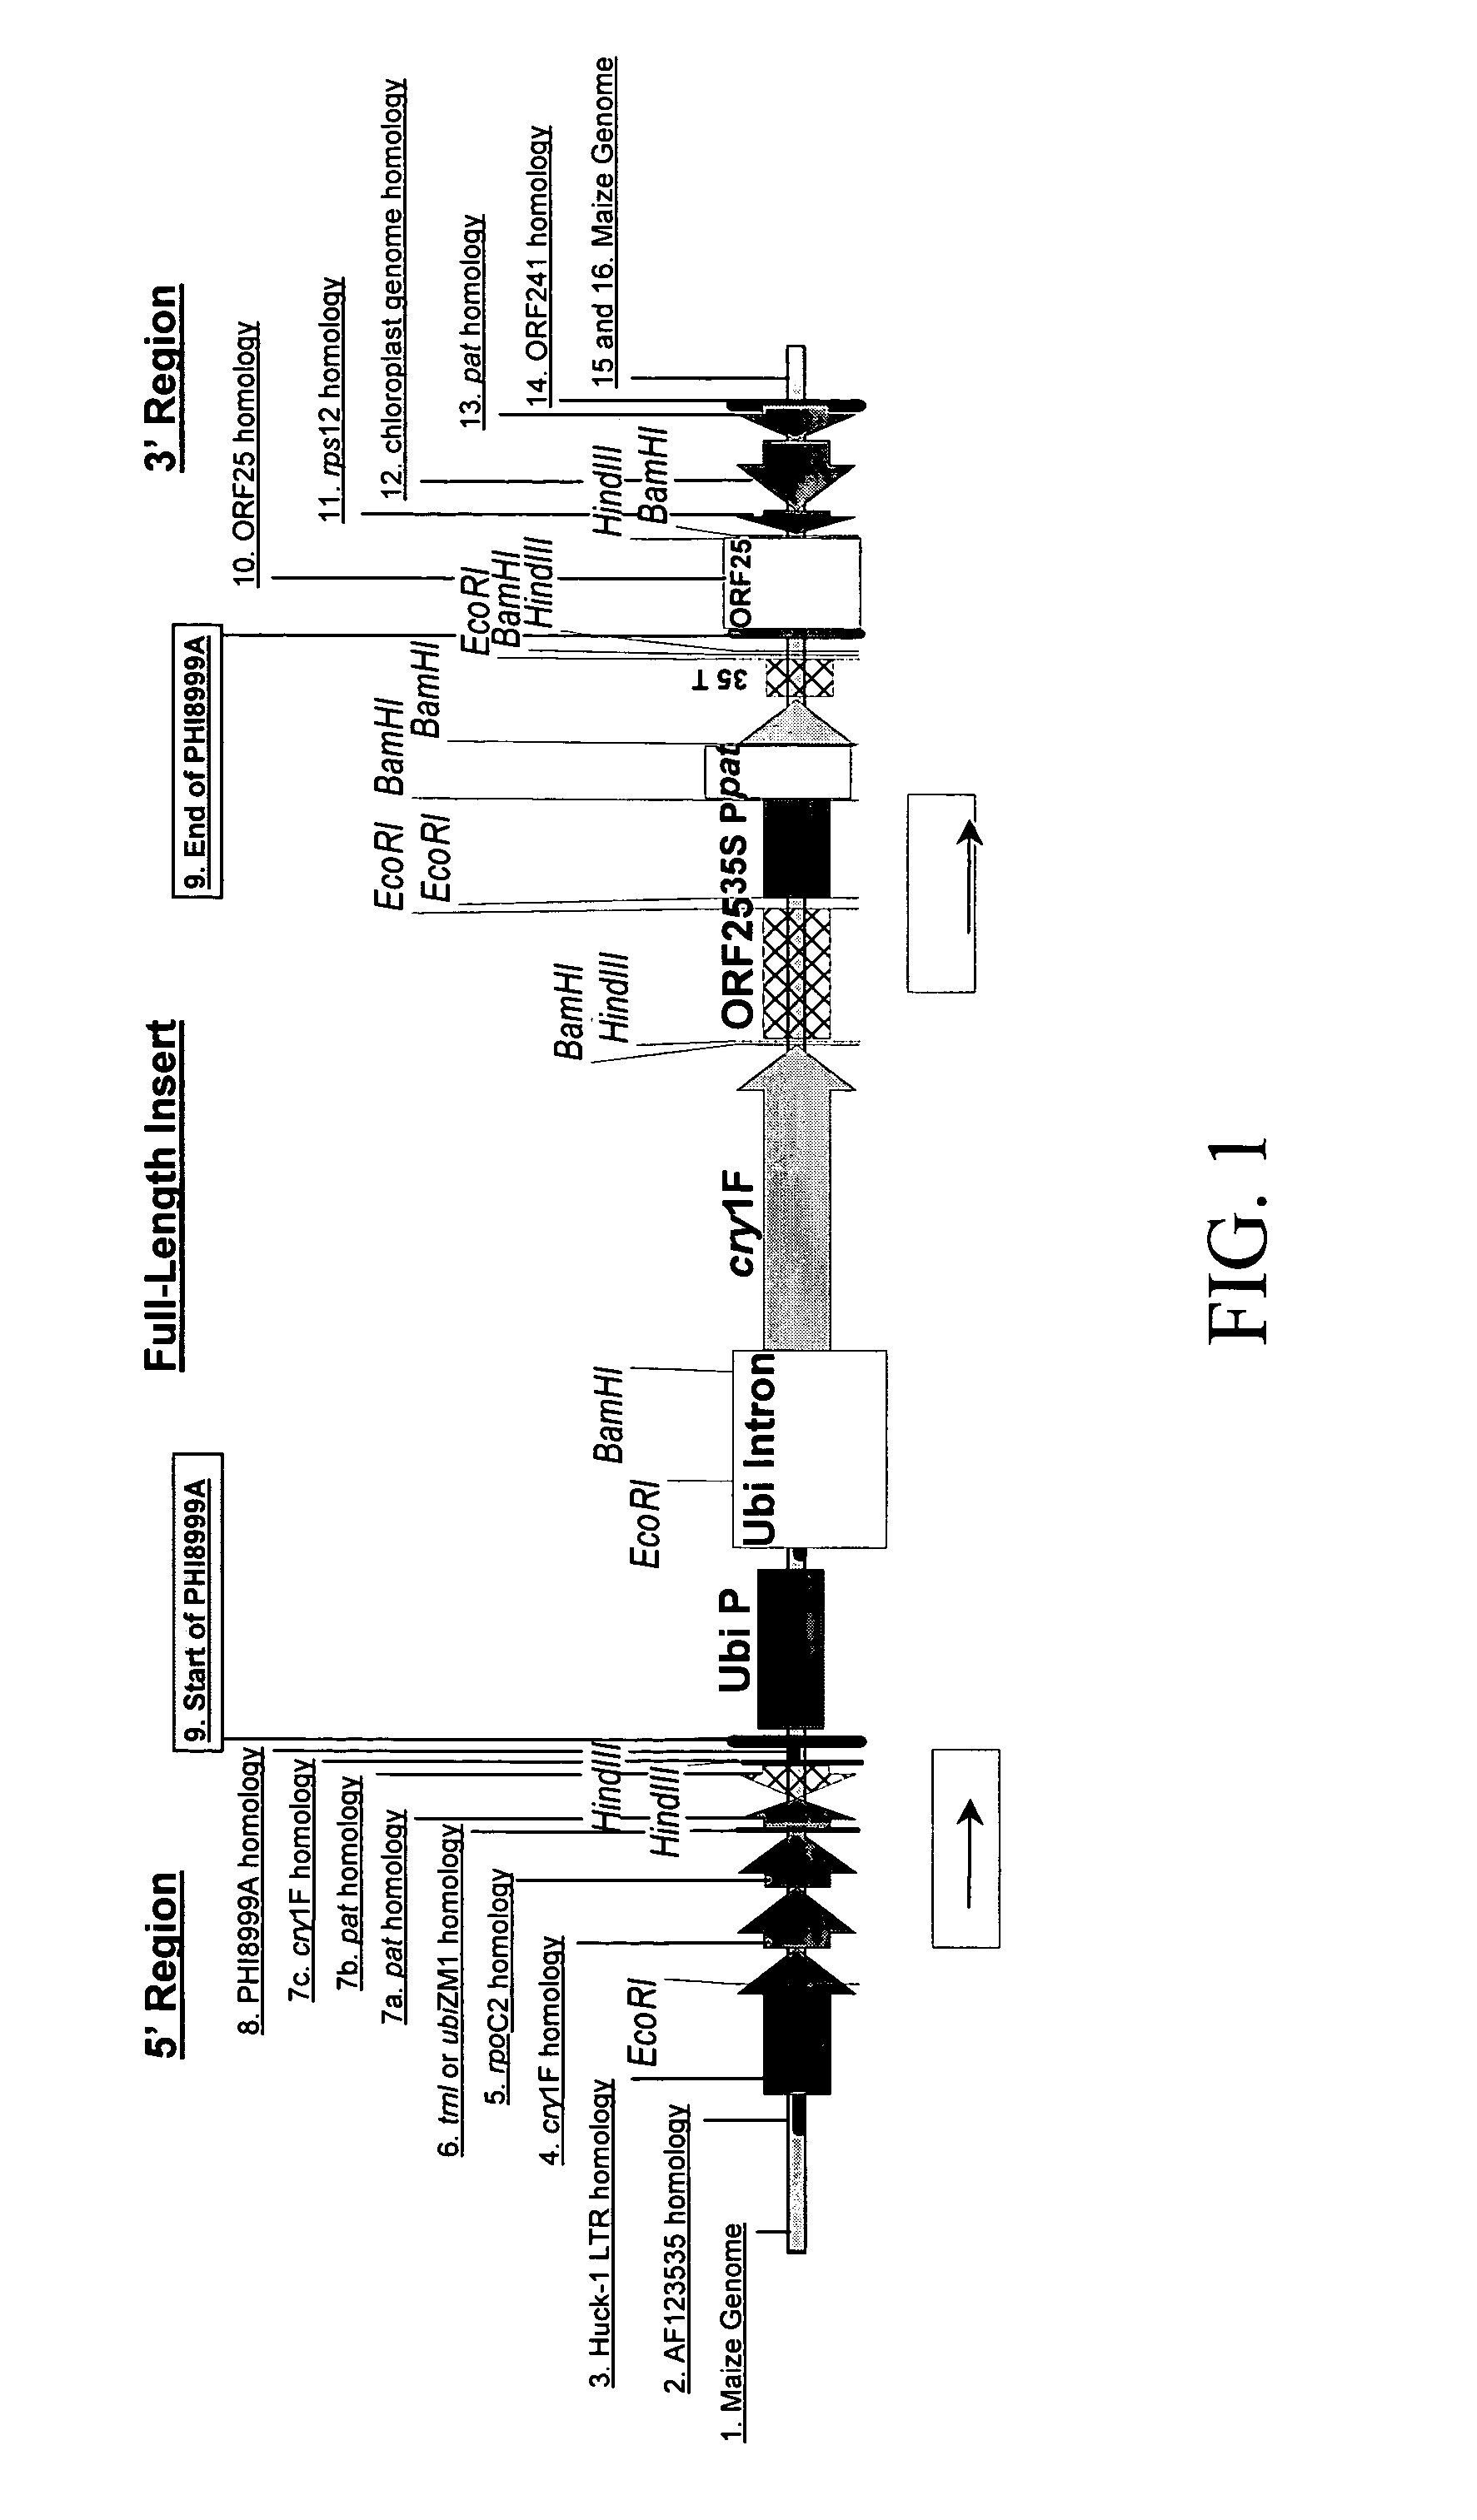 Corn event TC1507 and methods for detection thereof